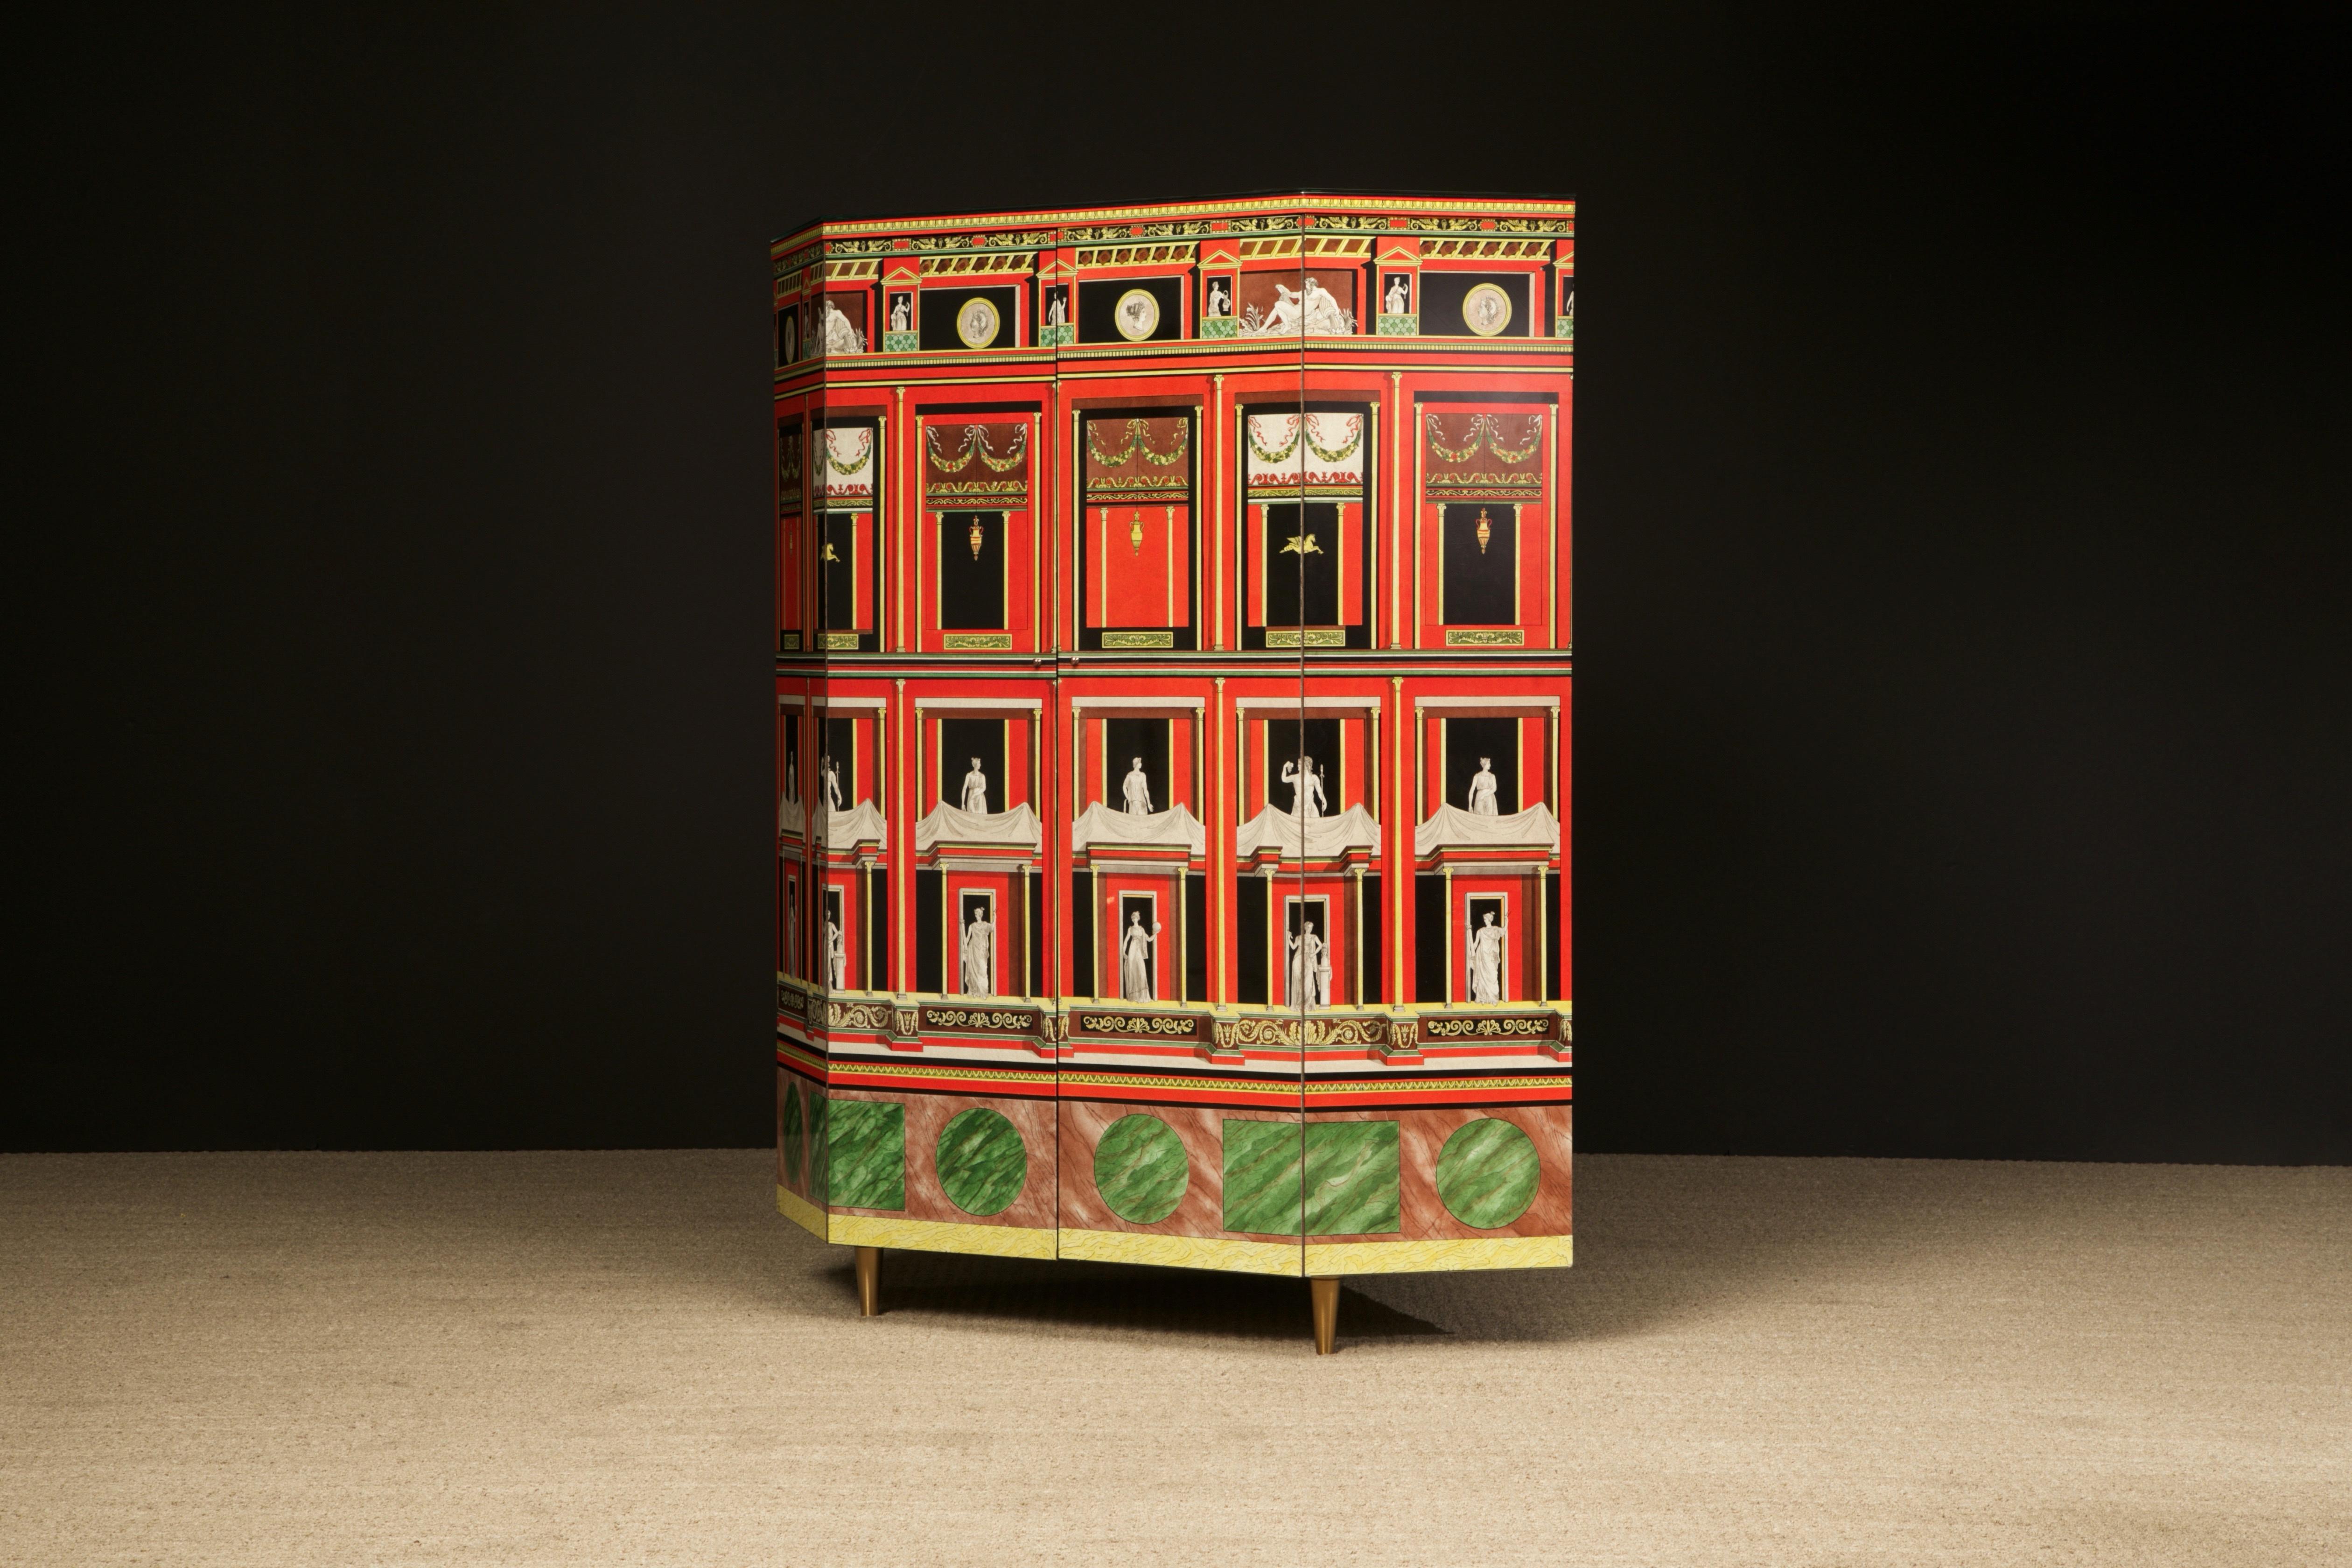 Late 20th Century 'Pompeiana' Corner Cabinet by Piero Fornasetti, Italy, 2 of 2 in 1988, Signed  For Sale